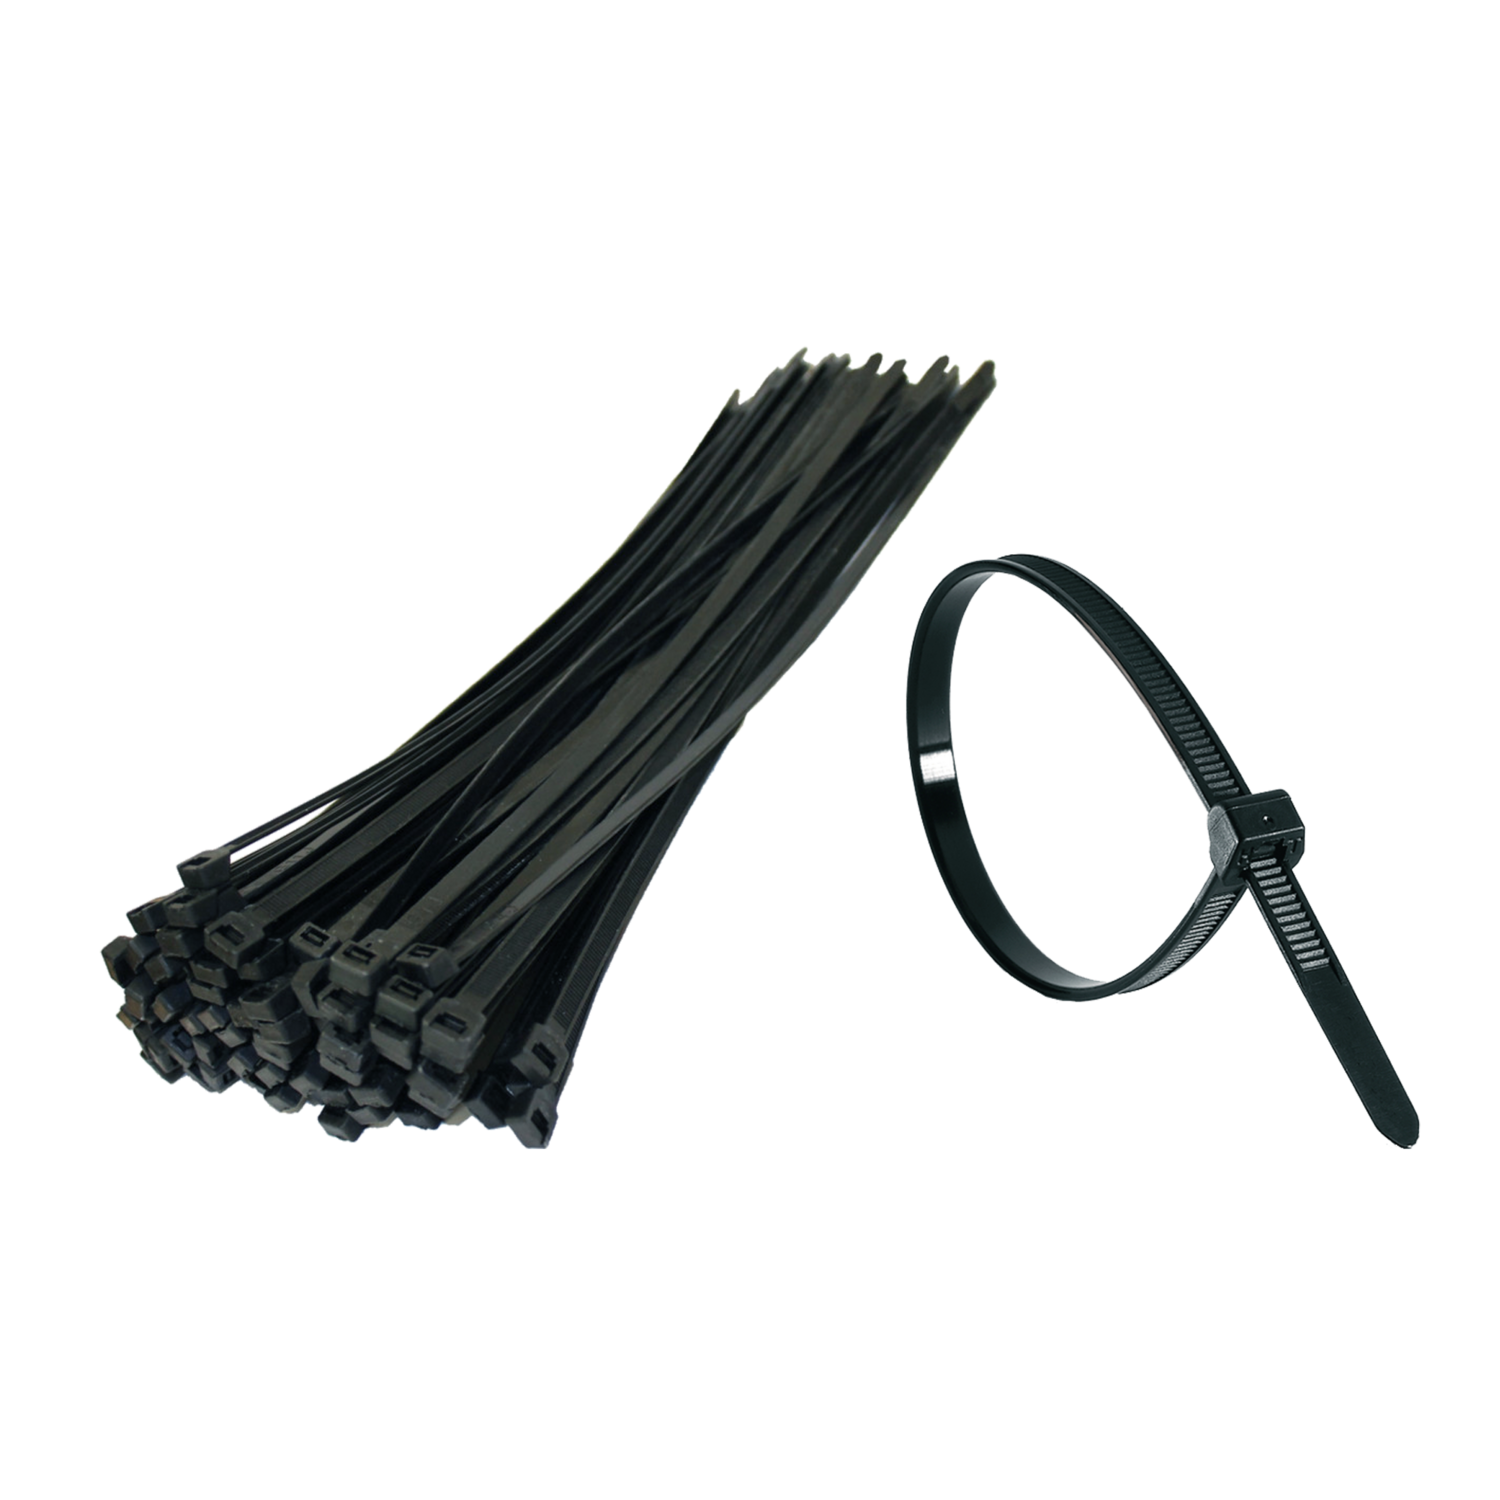 Homeaid BLACK NYLON CABLE TIES 2.5mm x 200mm x 100 pieces